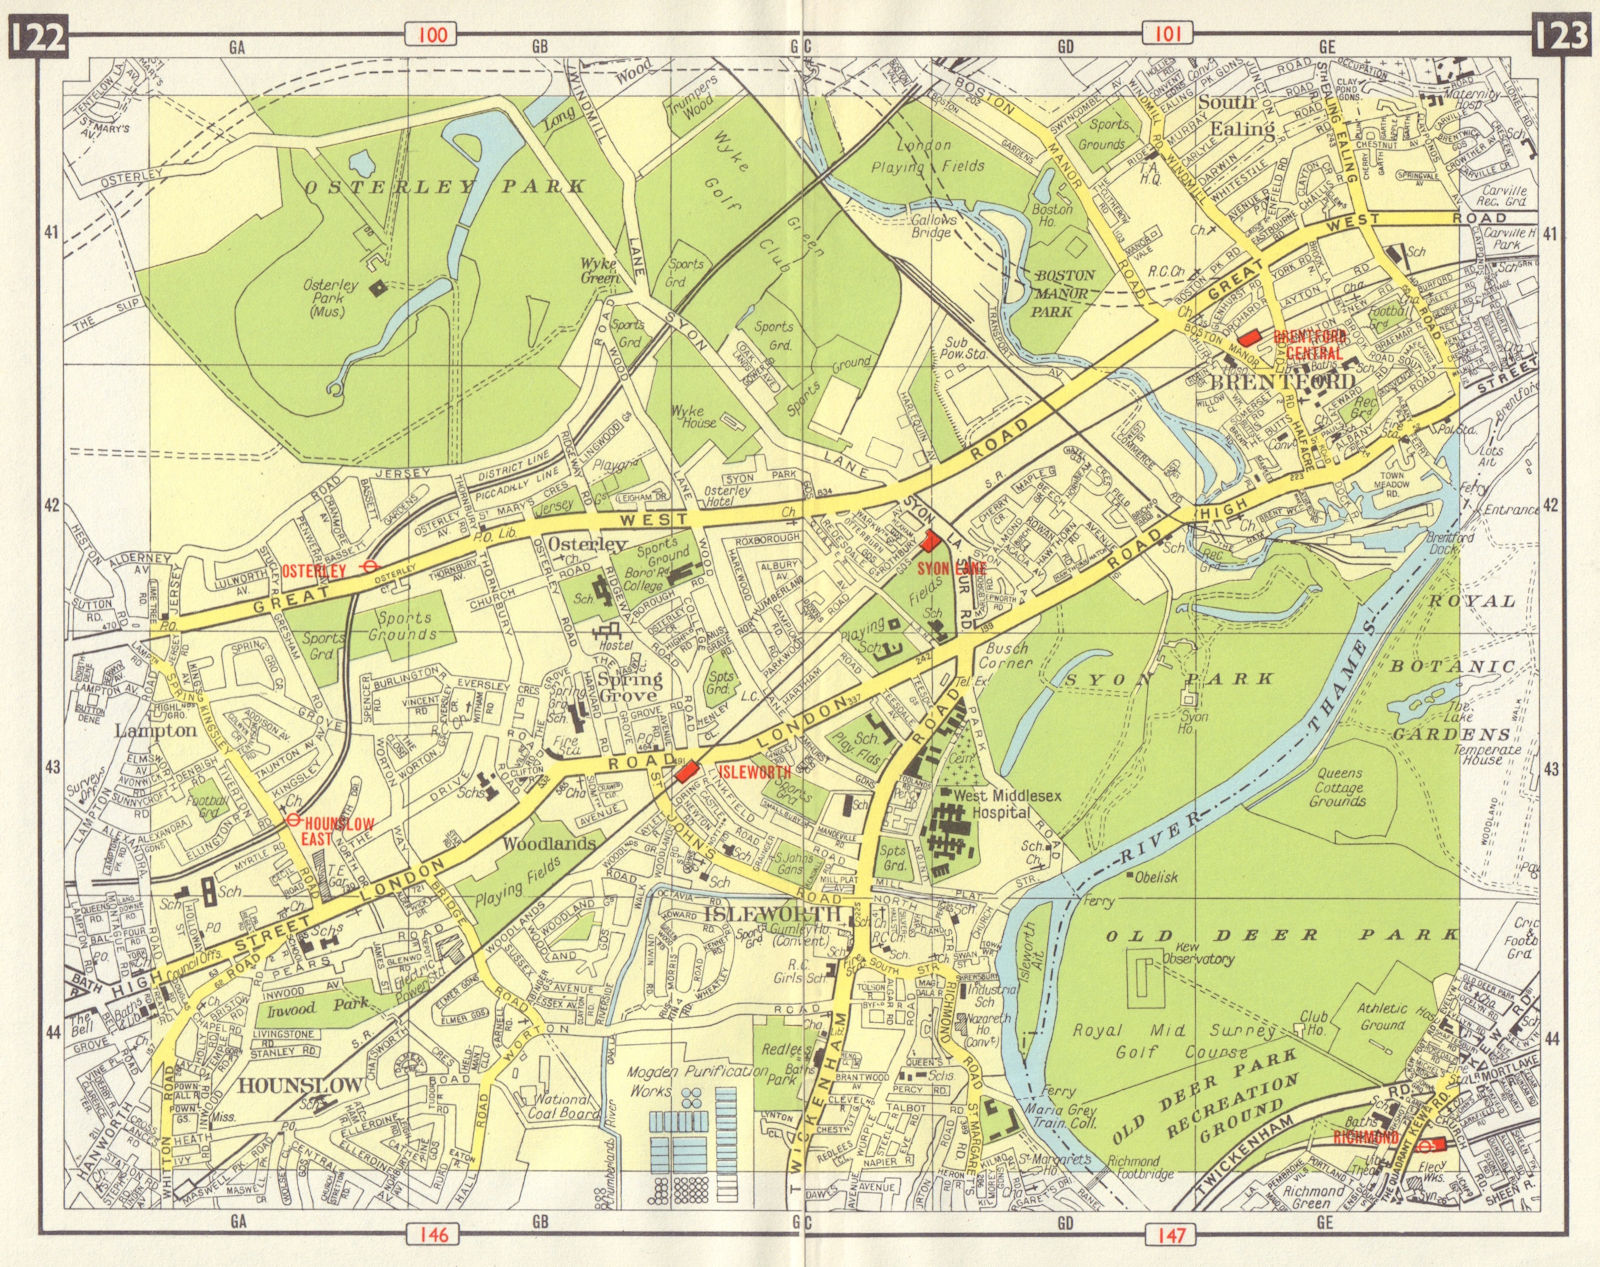 SW LONDON Hounslow Isleworth Osterley Brentford Richmond M3 projected 1965 map